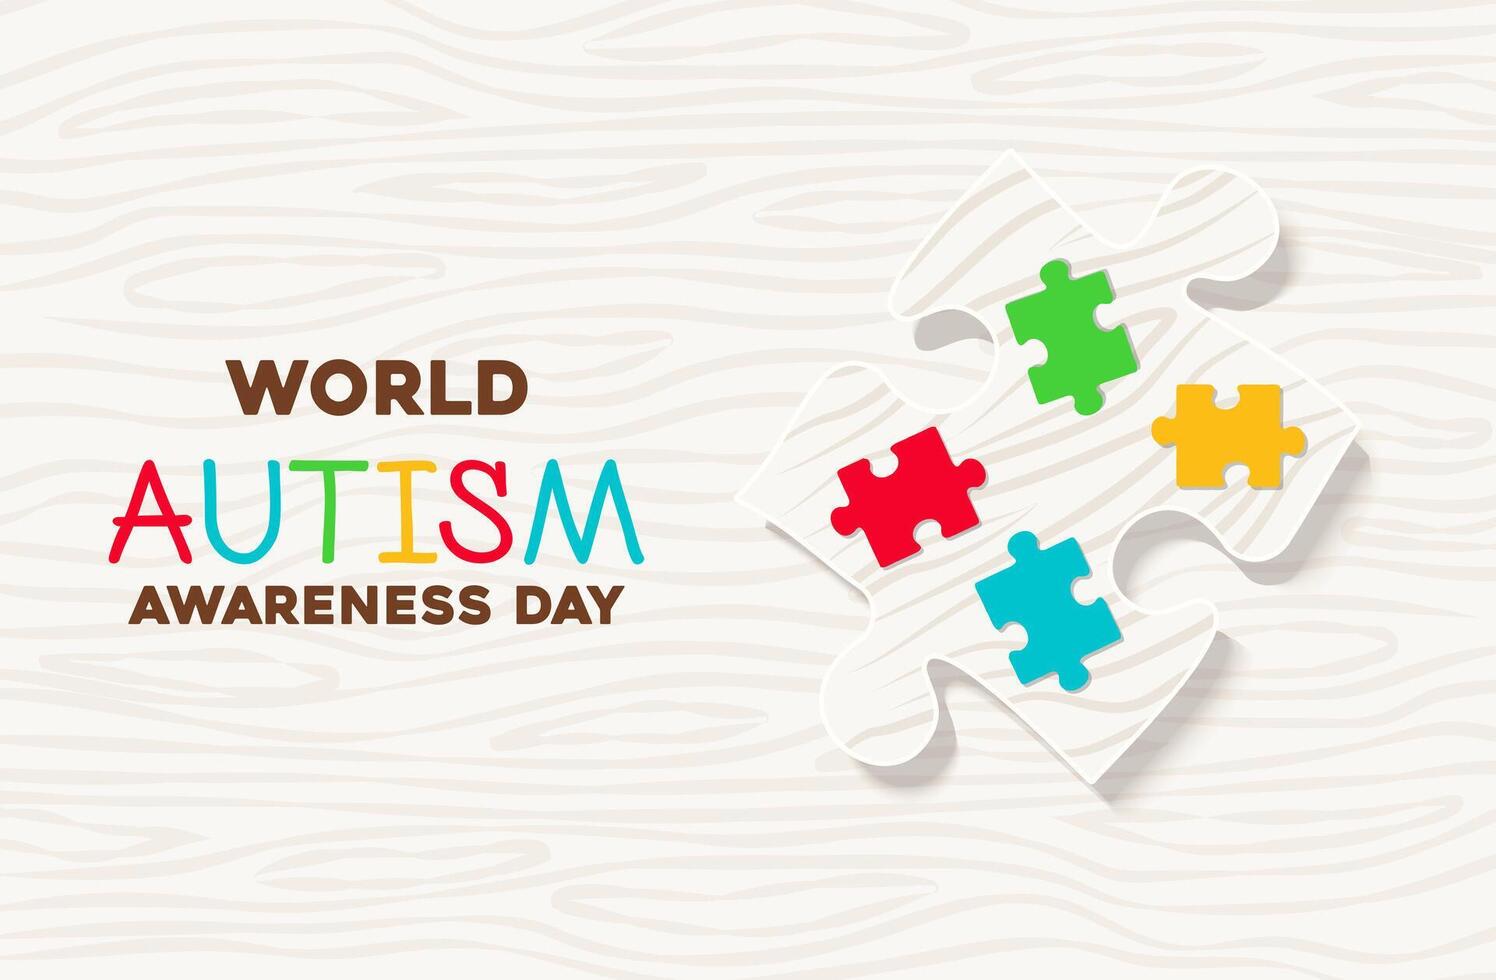 World autism awareness day. Colorful puzzle vector design sign. Symbol of autism. Medical flat illustration. Health care